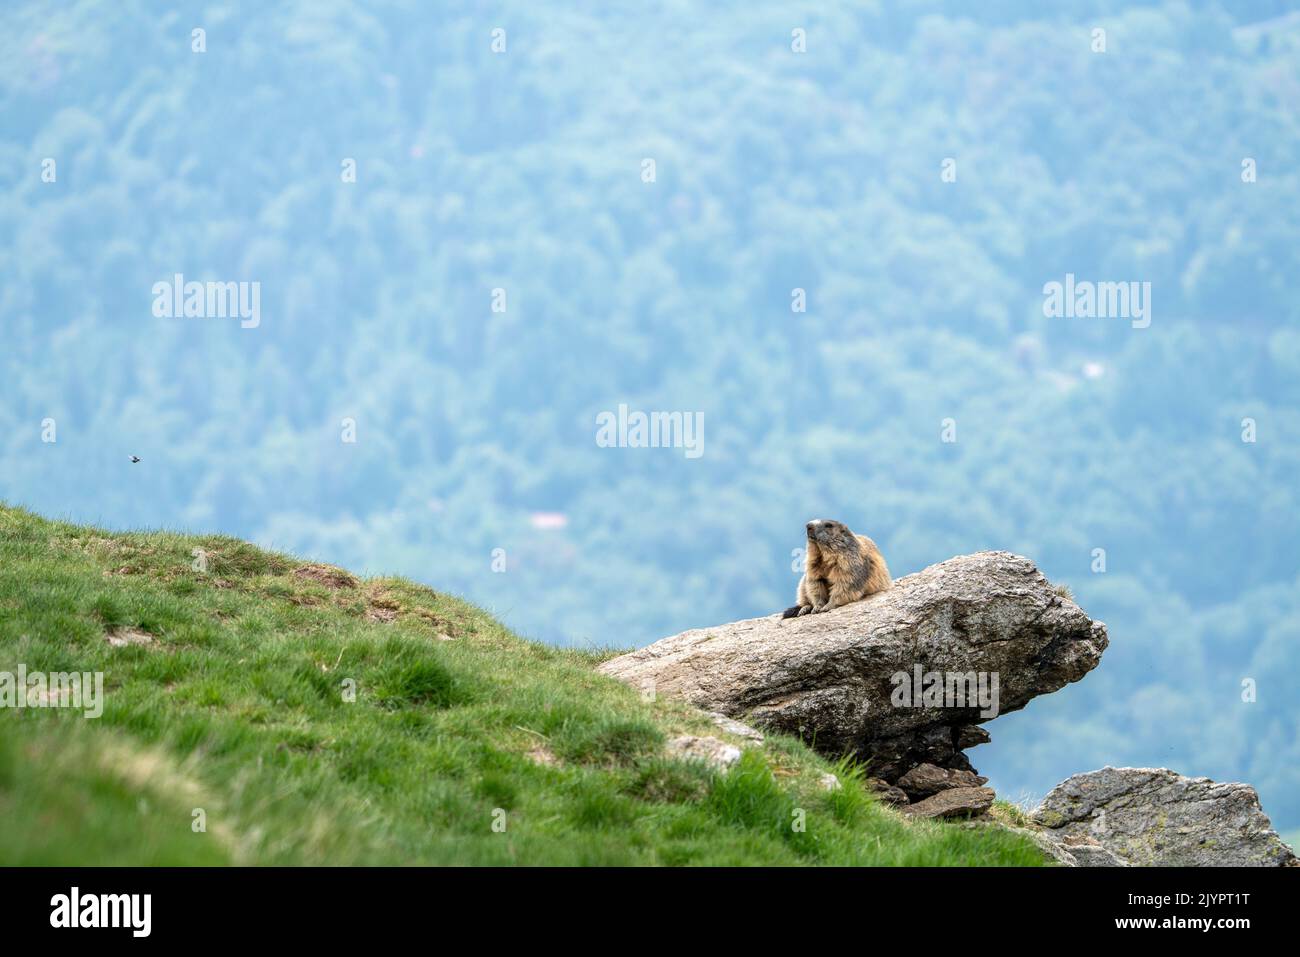 Alpine marmot (Marmota marmota) warming up on a rock. Valcolla, former municipality in the district of Lugano in the canton of Ticino, Switzerland Stock Photo